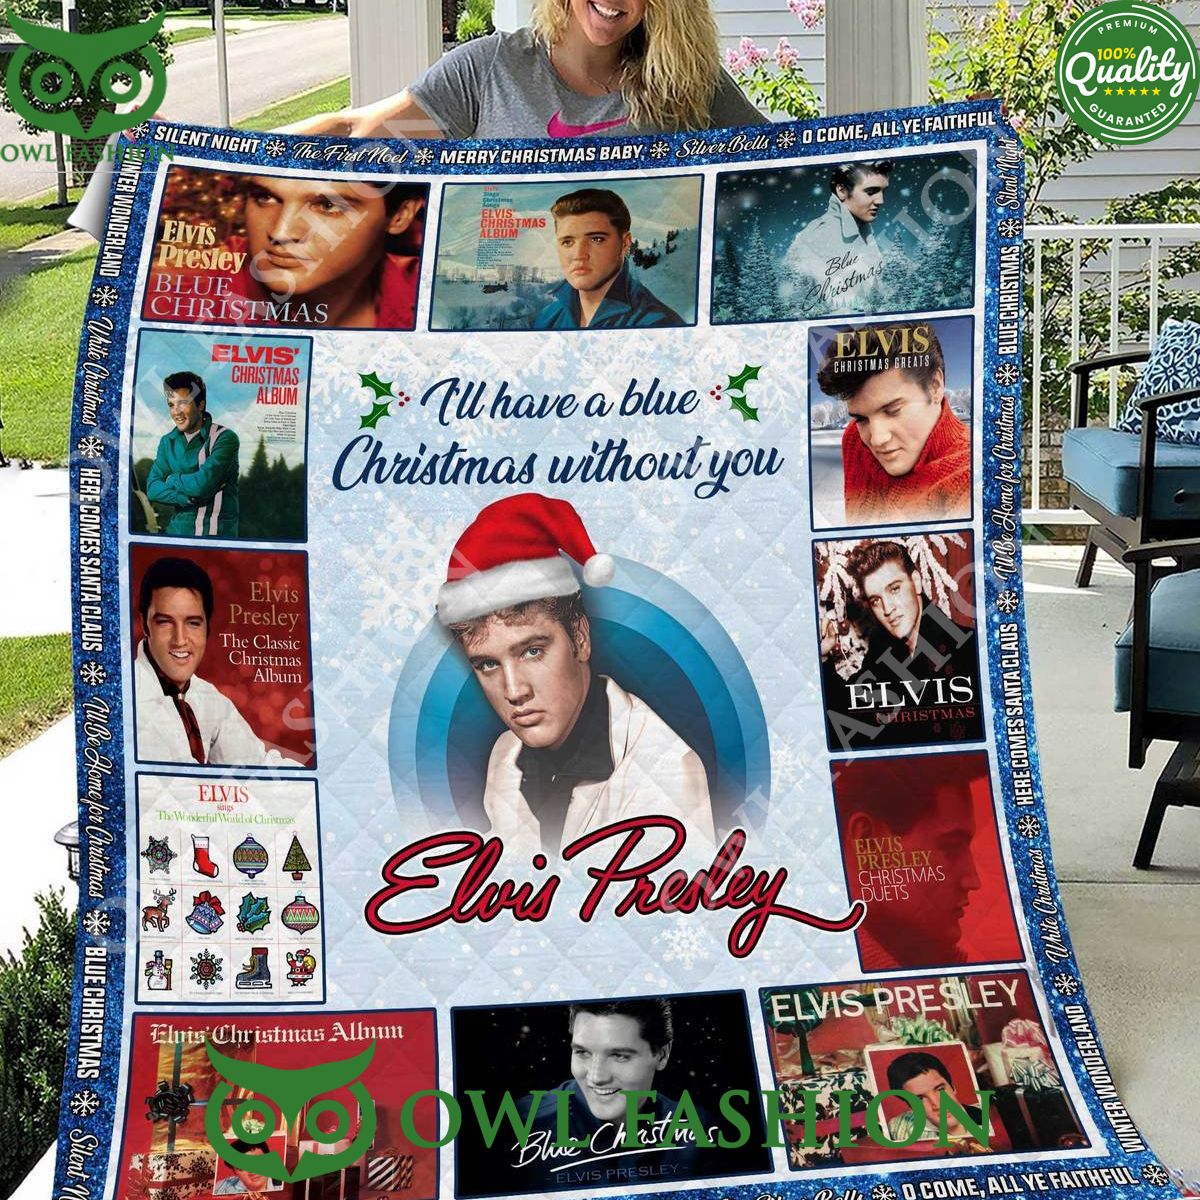 Elvis Presley Blue Christmas Without You Bedding Set Cuteness overloaded